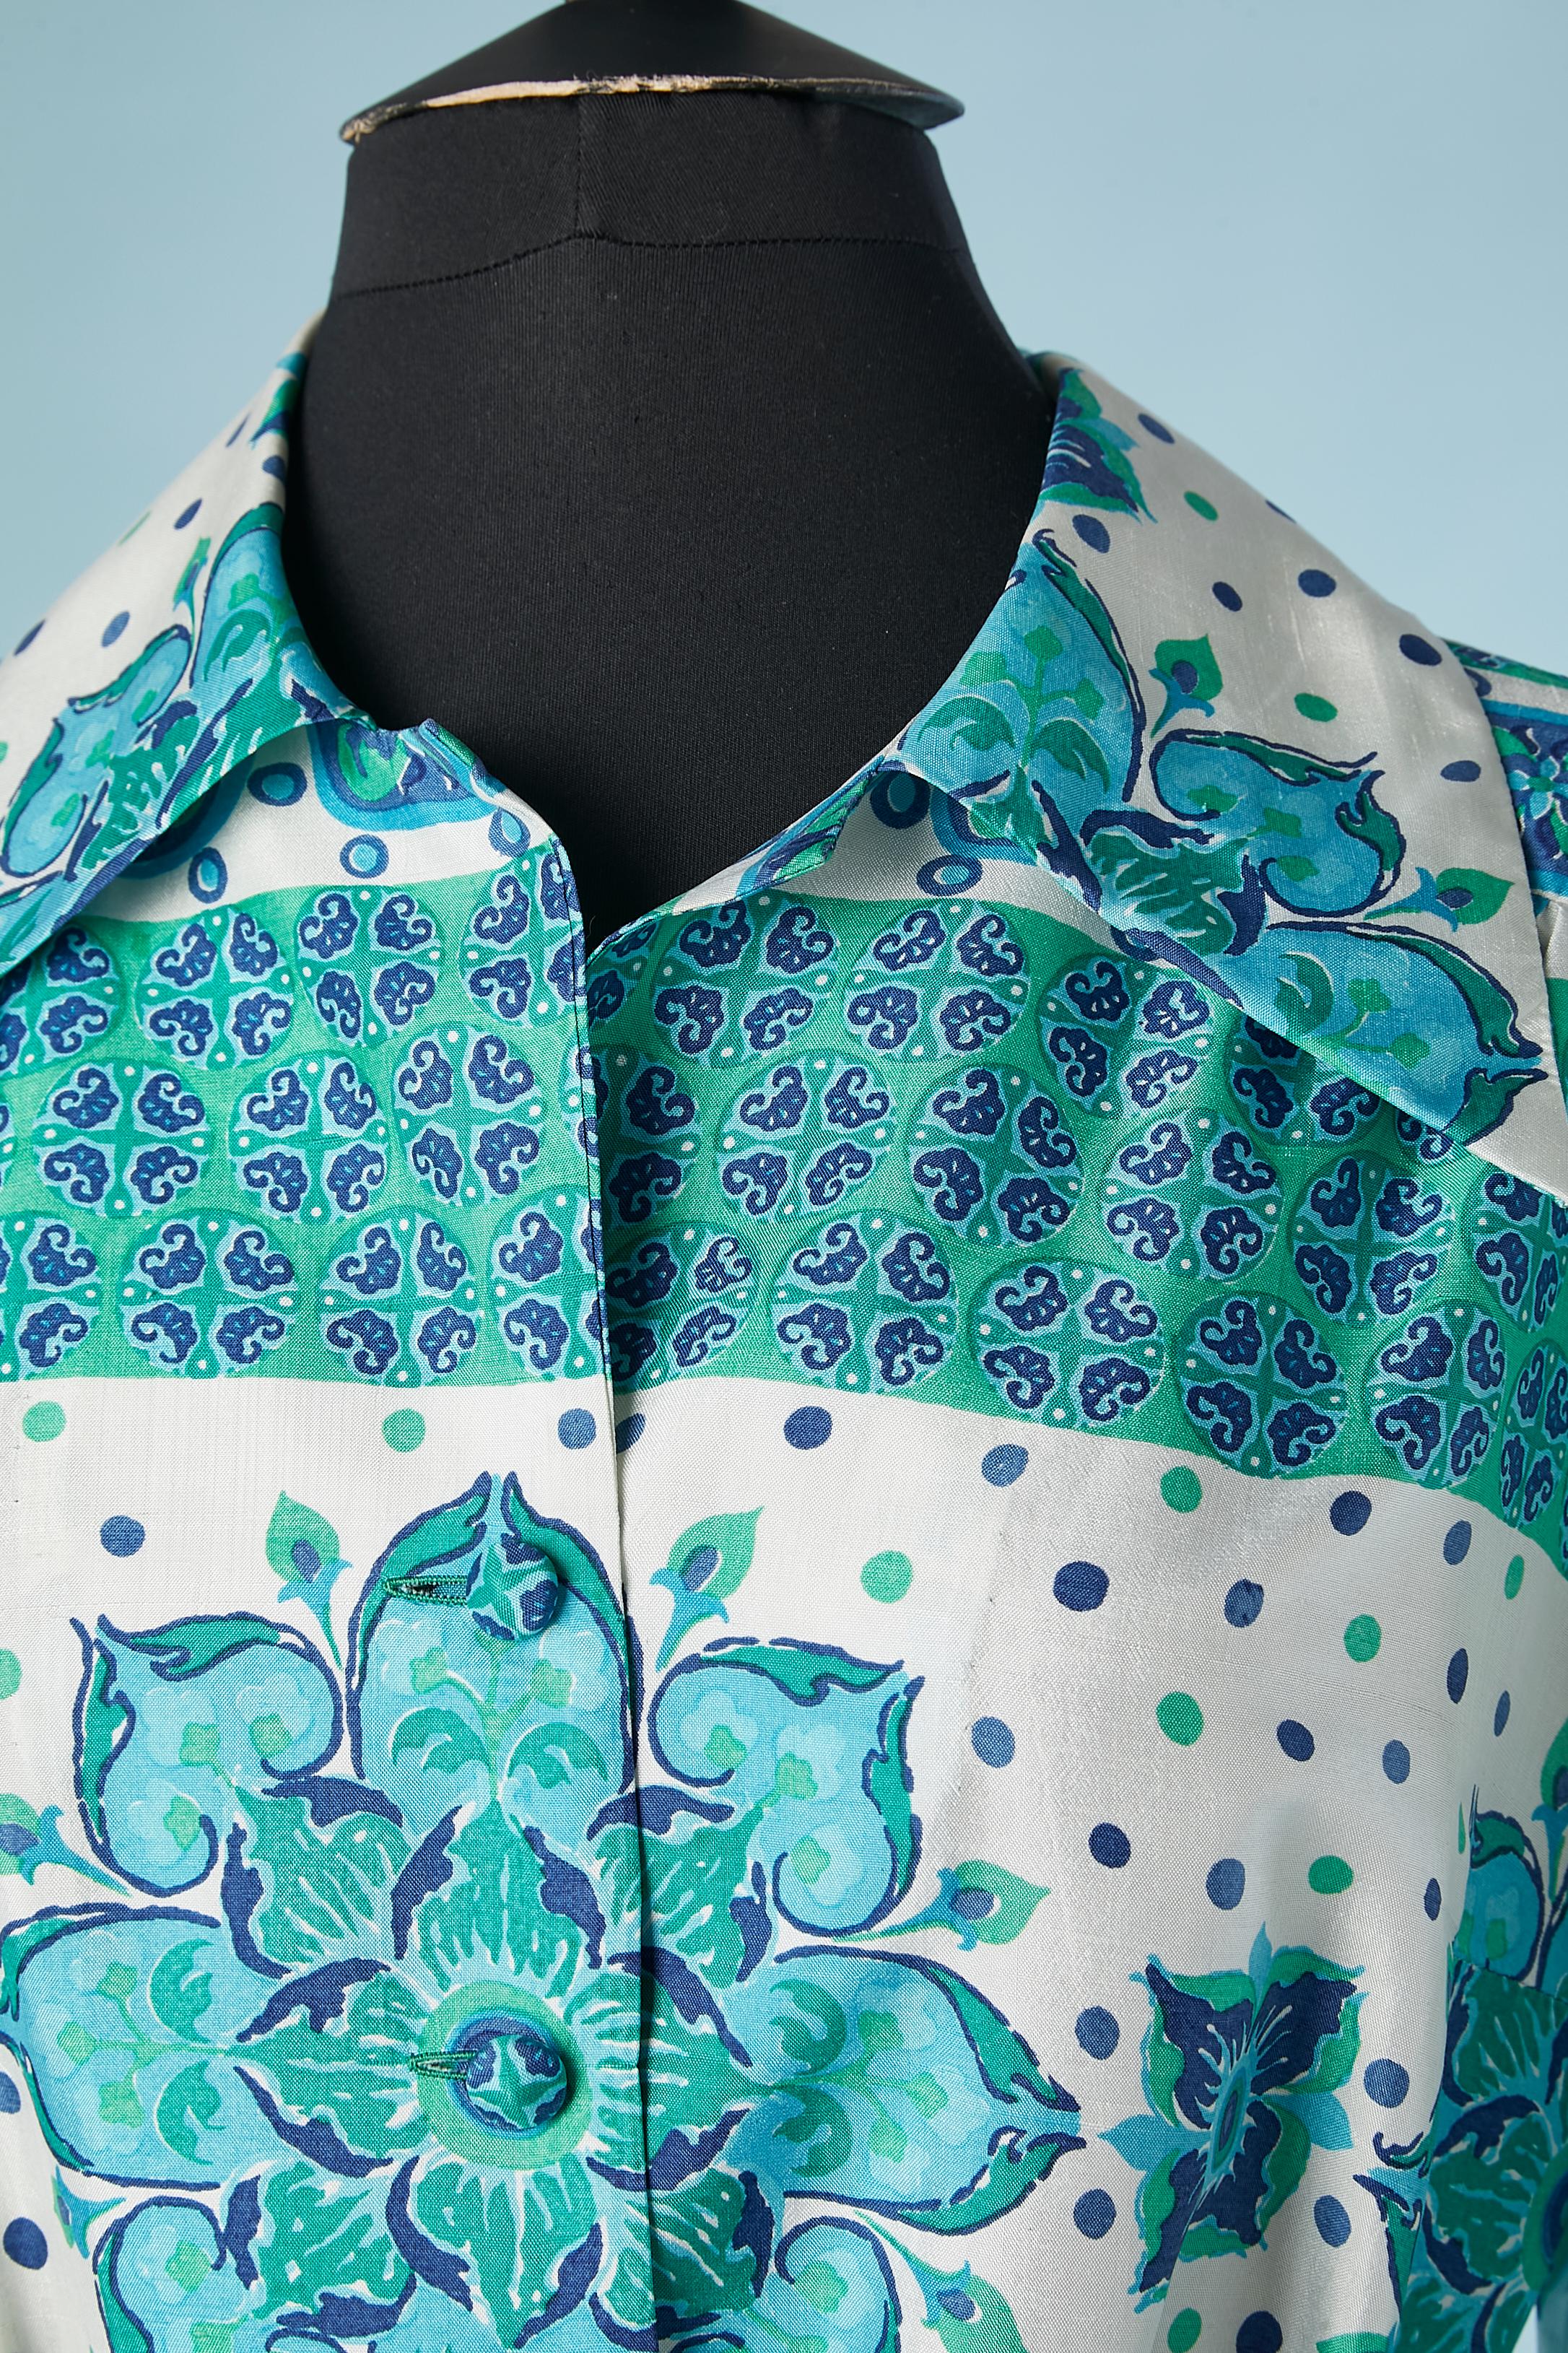 Circa 1970's Printed shirt in shantung with pockets and belt. Buttons covered with fabric. 
SIZE L